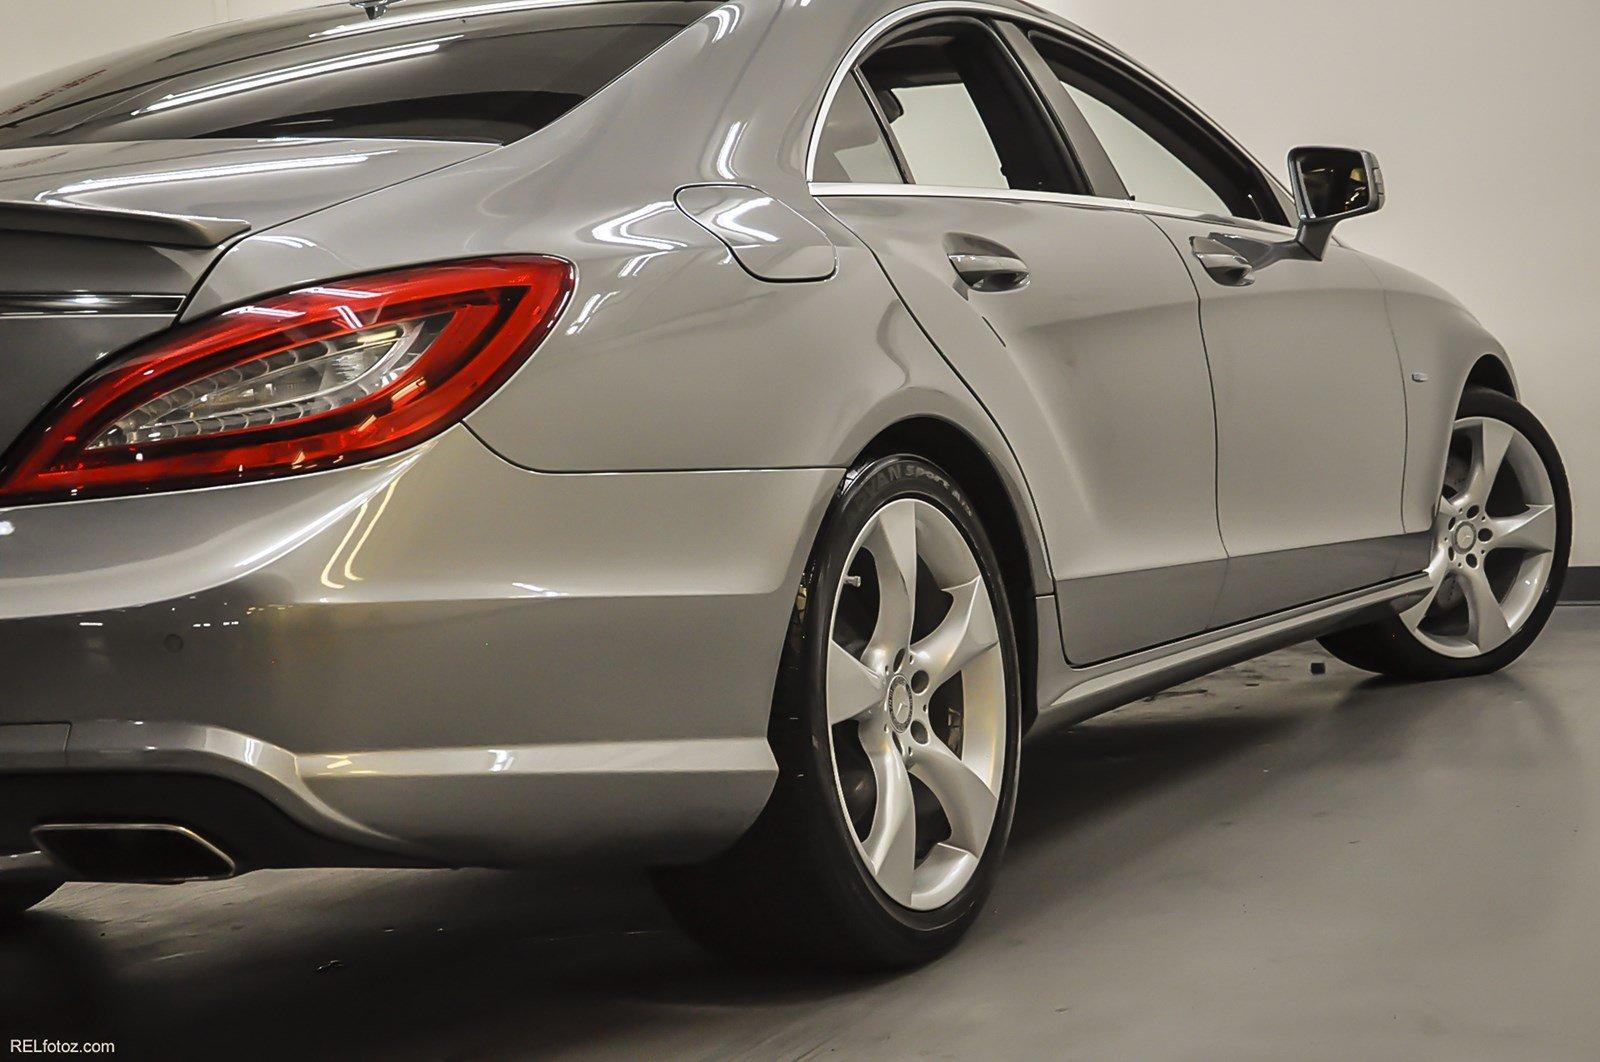 Used 2012 Mercedes-Benz CLS-Class CLS 550 for sale Sold at Gravity Autos Marietta in Marietta GA 30060 7